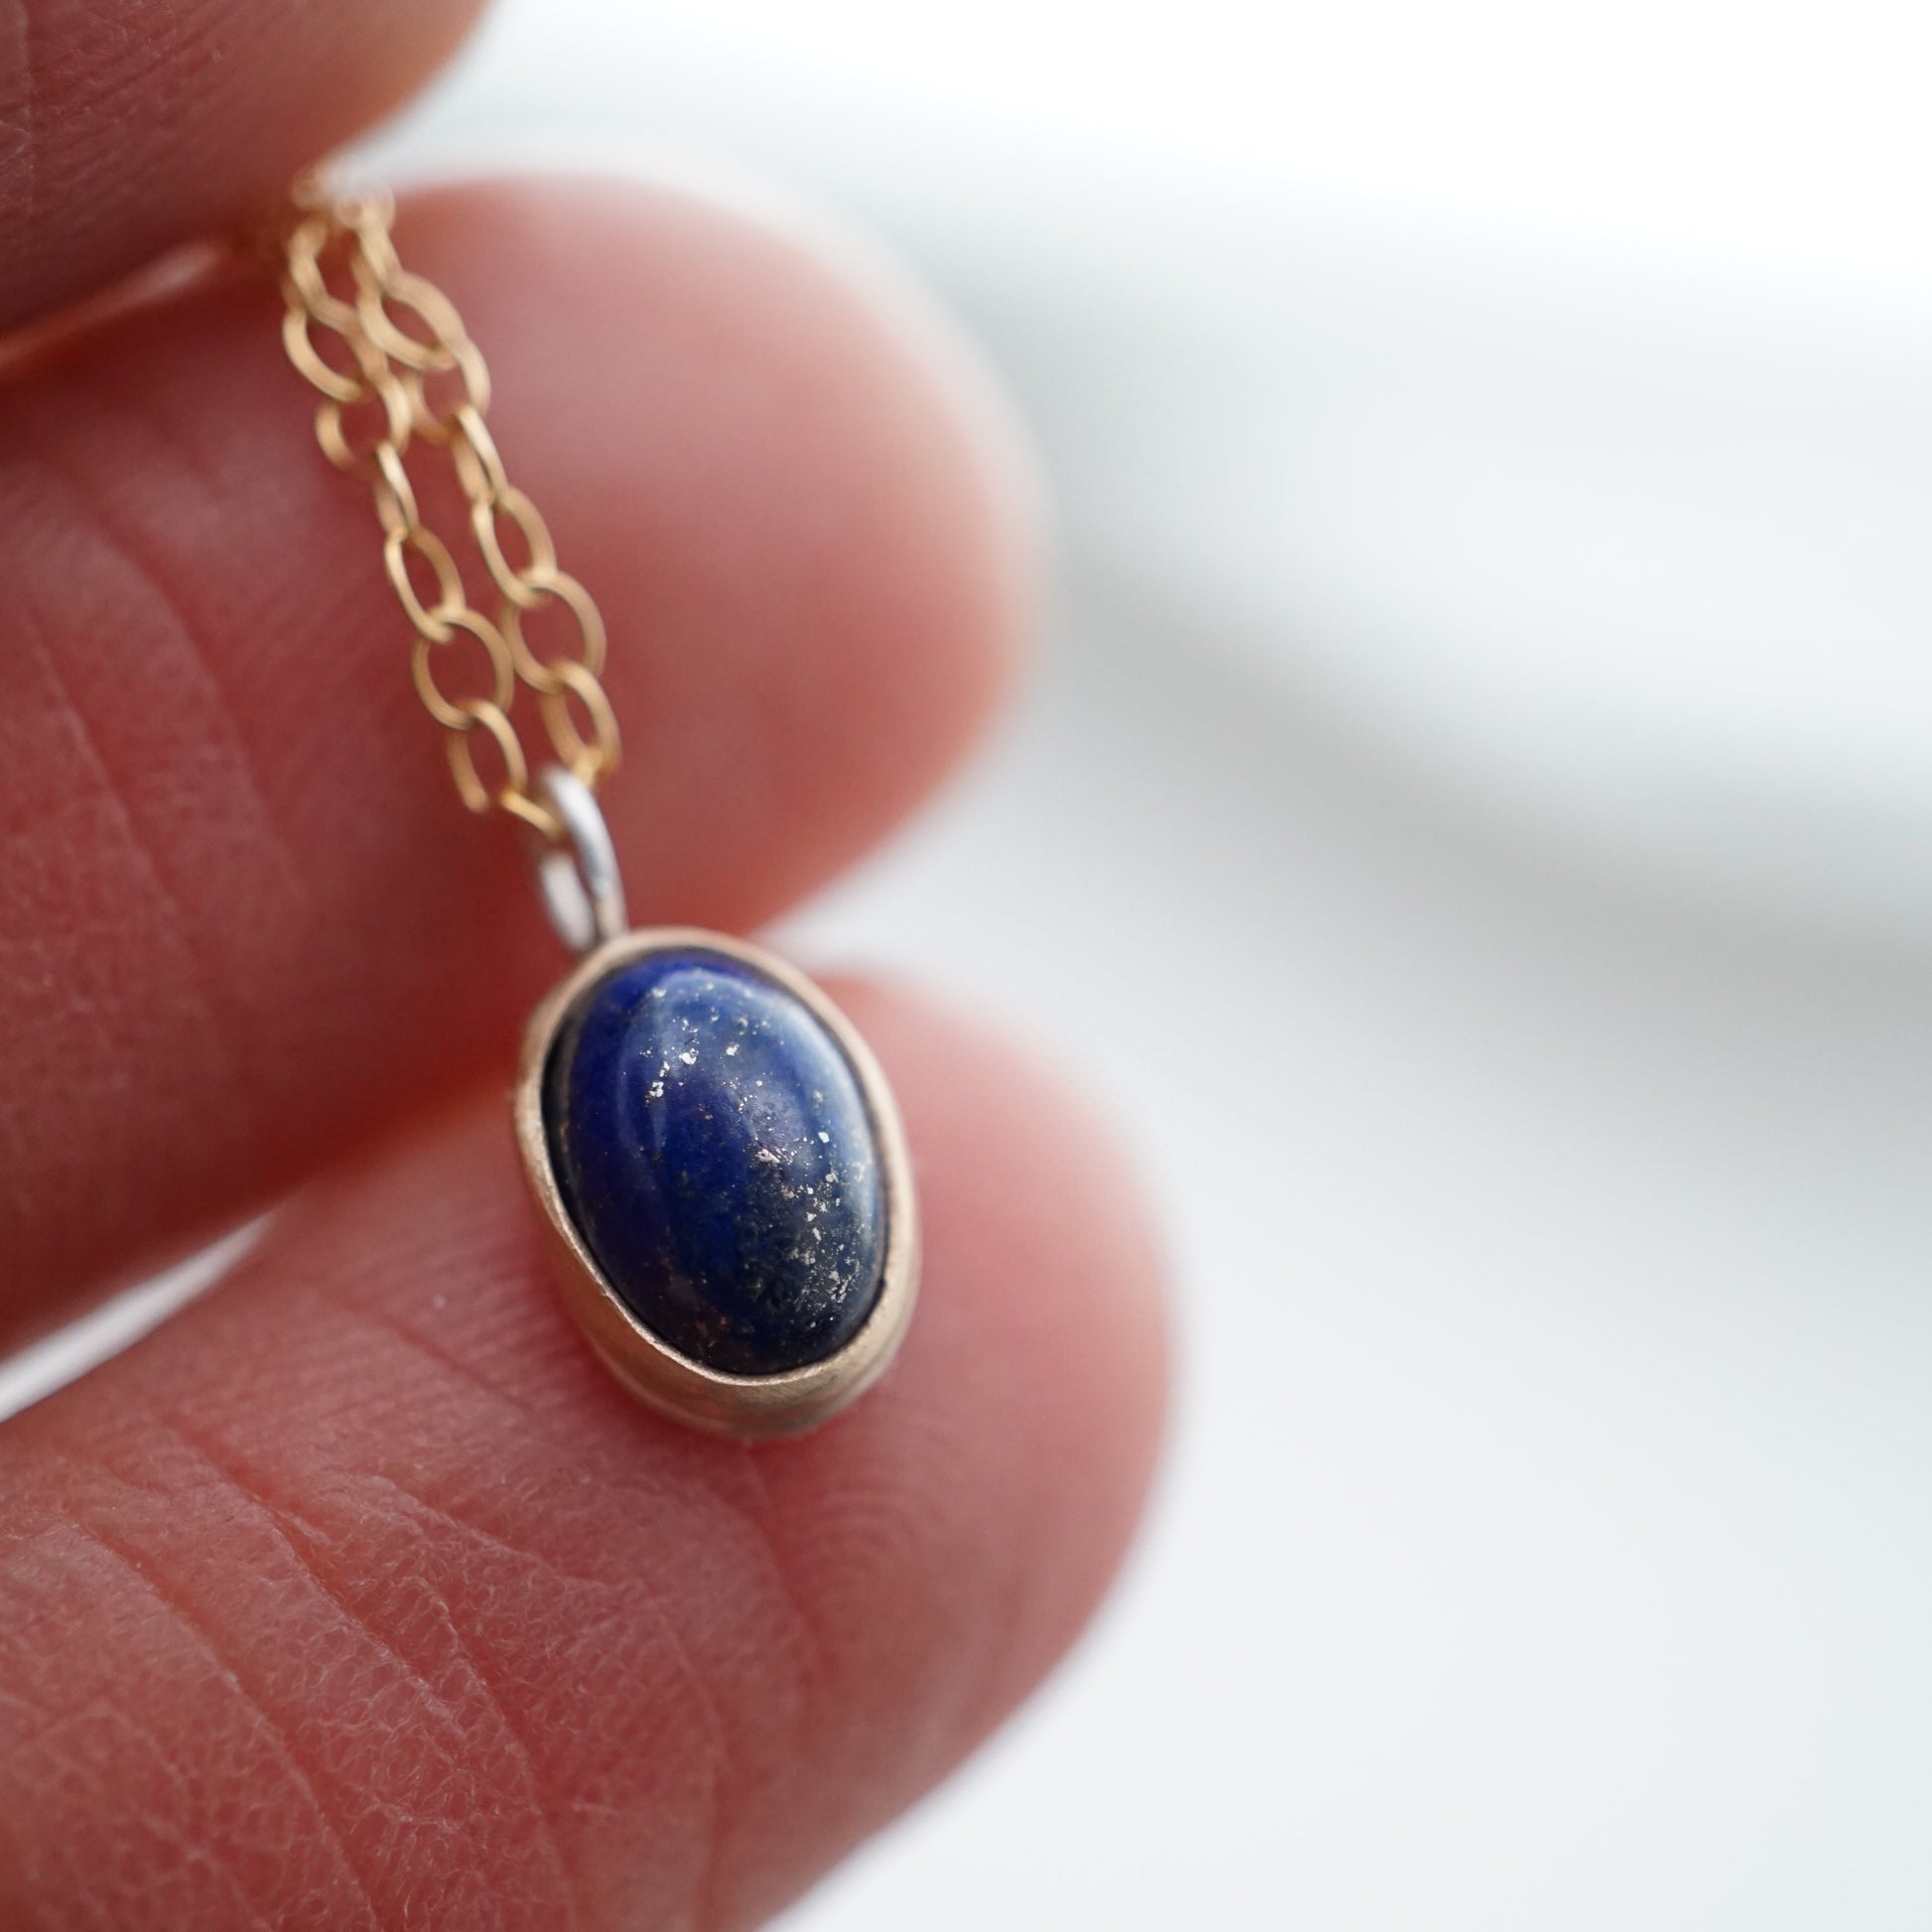 dainty lapis + 14k goldfill + silver necklace - 16" chain - Lumenrose